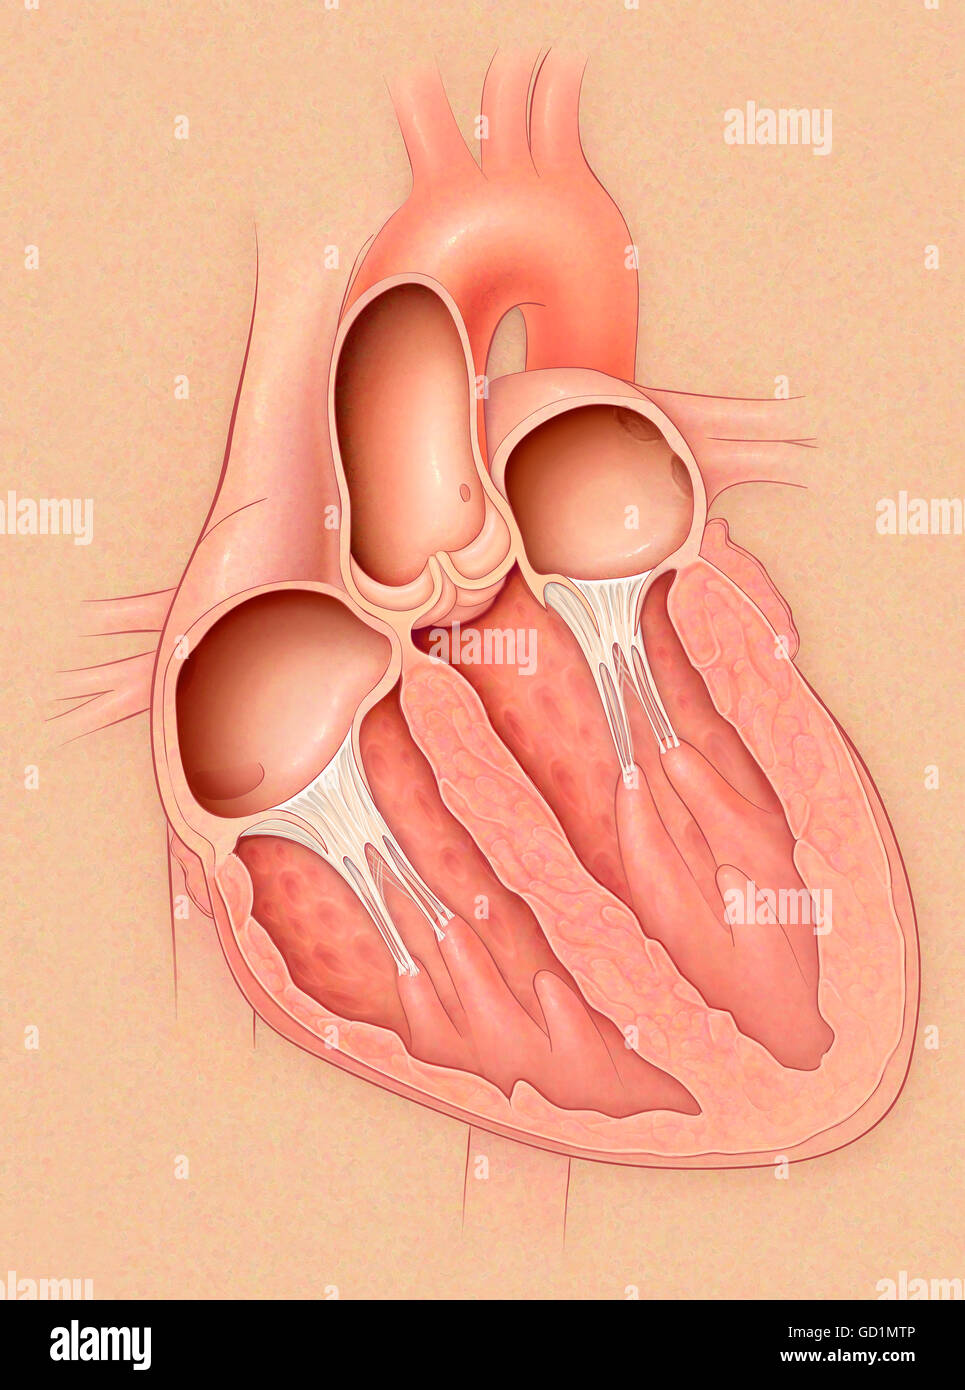 Normal heart in cross section showing the right and left atriums and ventricles Stock Photo